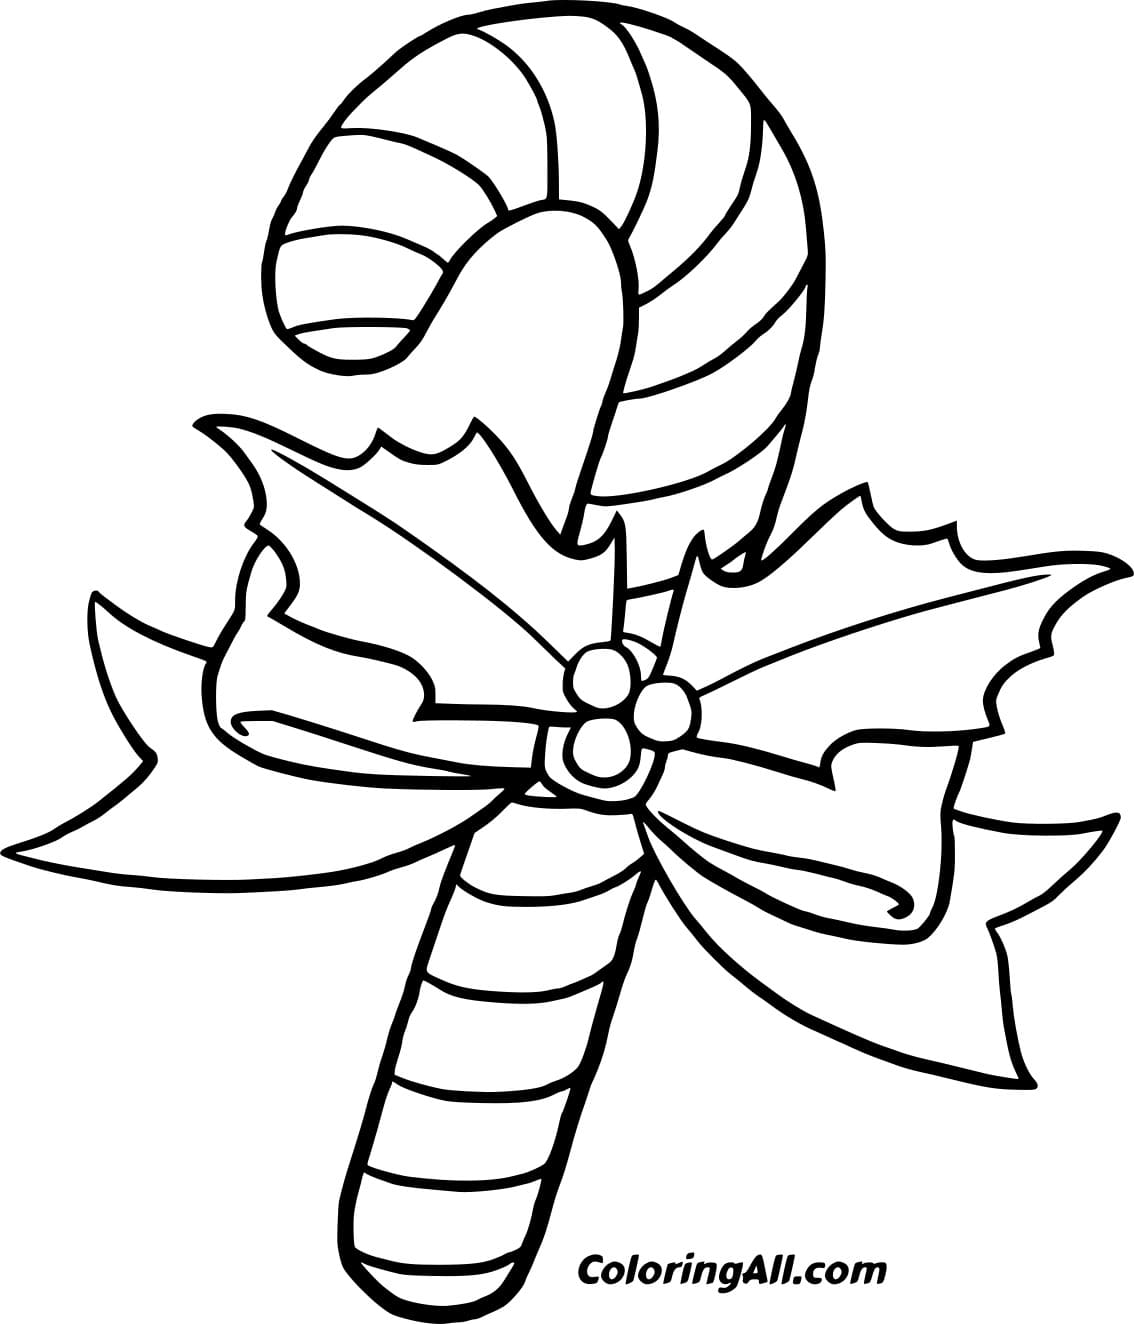 Simple Tilted Candy Cane With Leafs Coloring Page